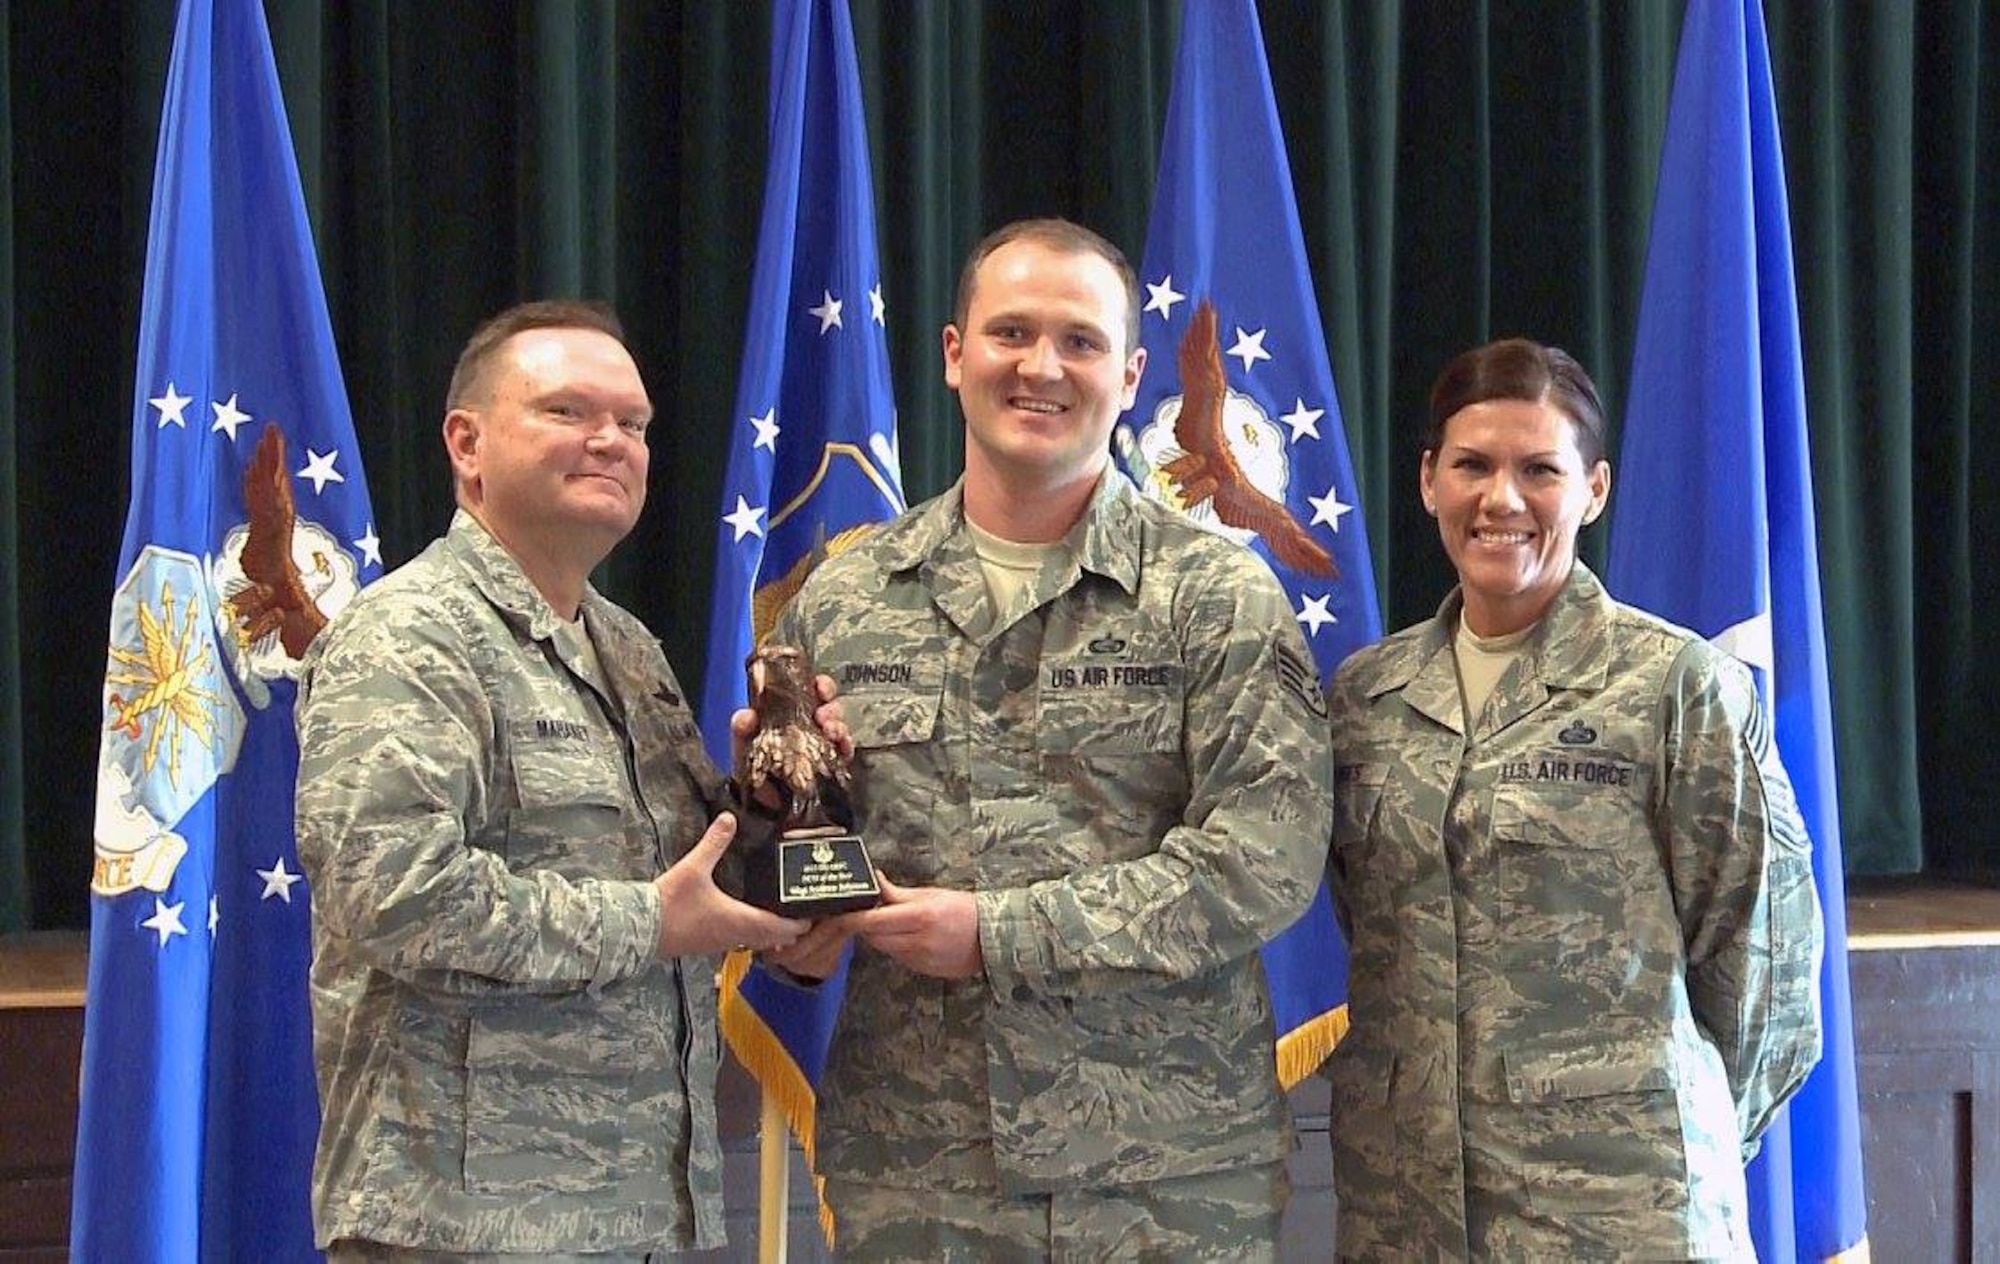 Brig. Gen. Samuel “Bo” Mahaney, Air Reserve Personnel Center commander, and Chief Master Sgt. Ruthe Flores, ARPC command chief, present the ARPC Noncommissioned Officer of the Year award to Staff Sgt. Andrew Johnson. Mahaney honored ARPC’s 2015 outstanding performers of the year Feb. 16, 2016, at the Heritage Eagle Bend Country Club in Aurora, Colo. (U.S. Air Force photo/Quinn Jacobson)